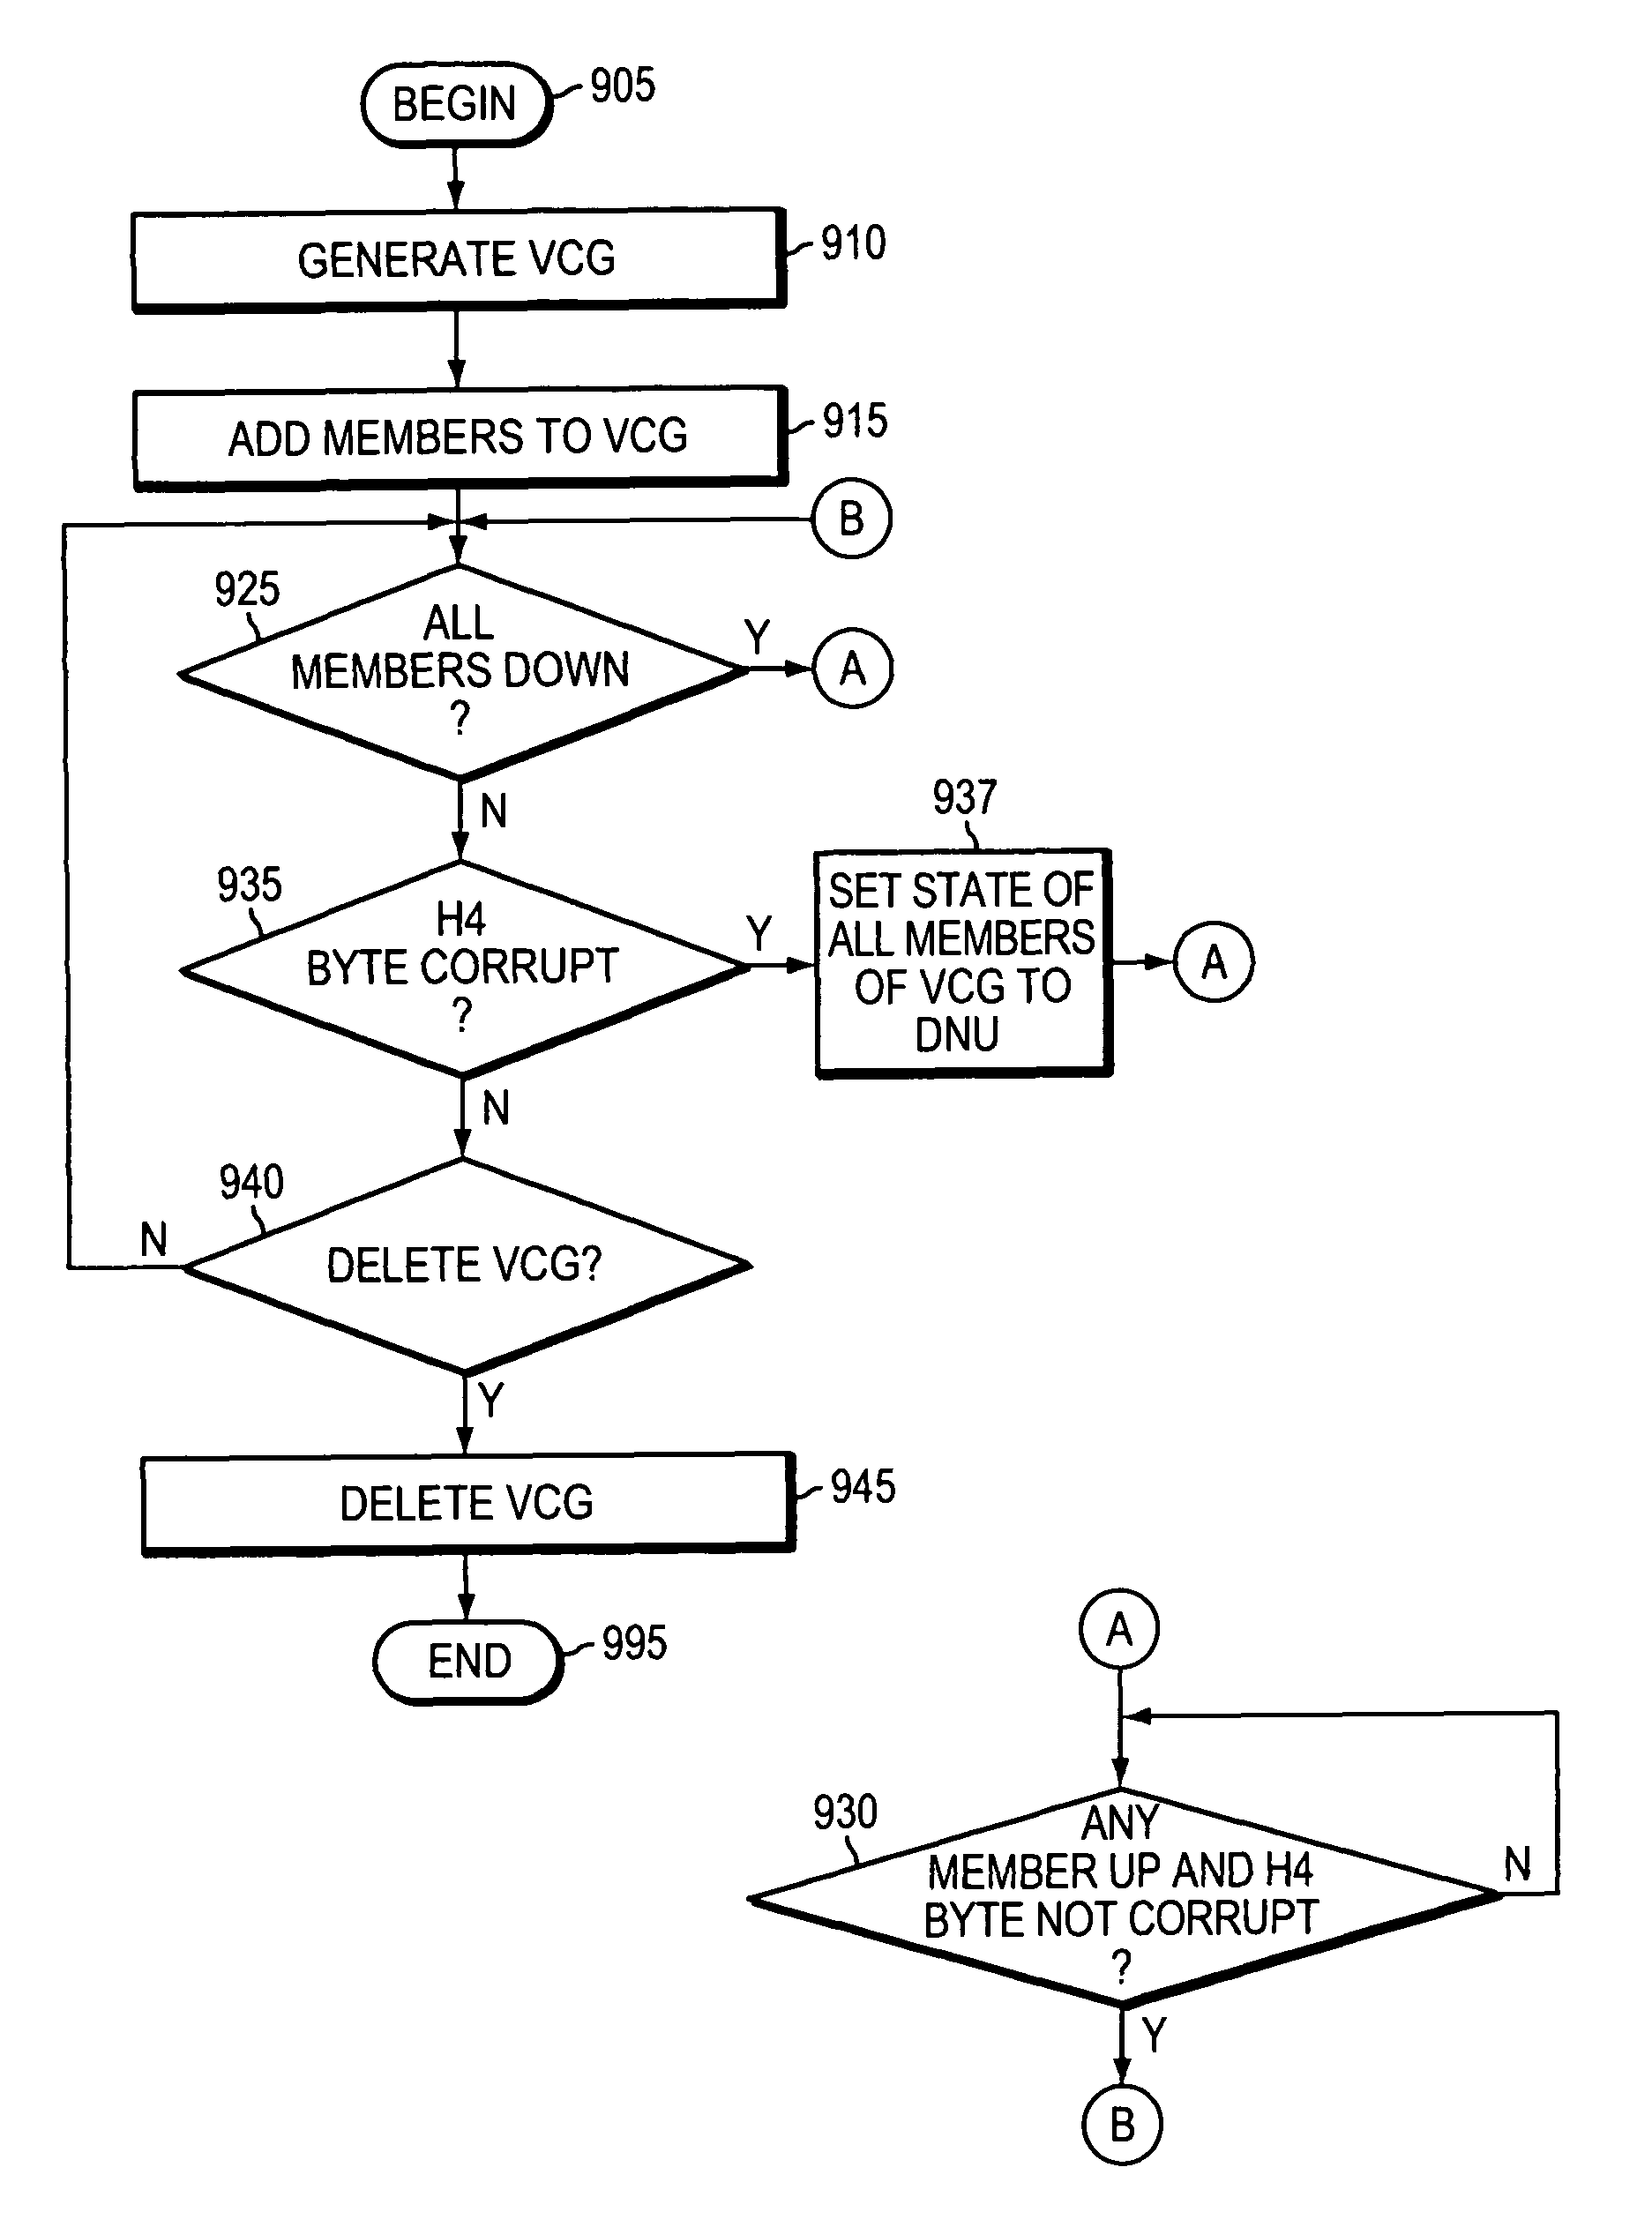 Method and apparatus for enabling LCAS-like feature through embedded software